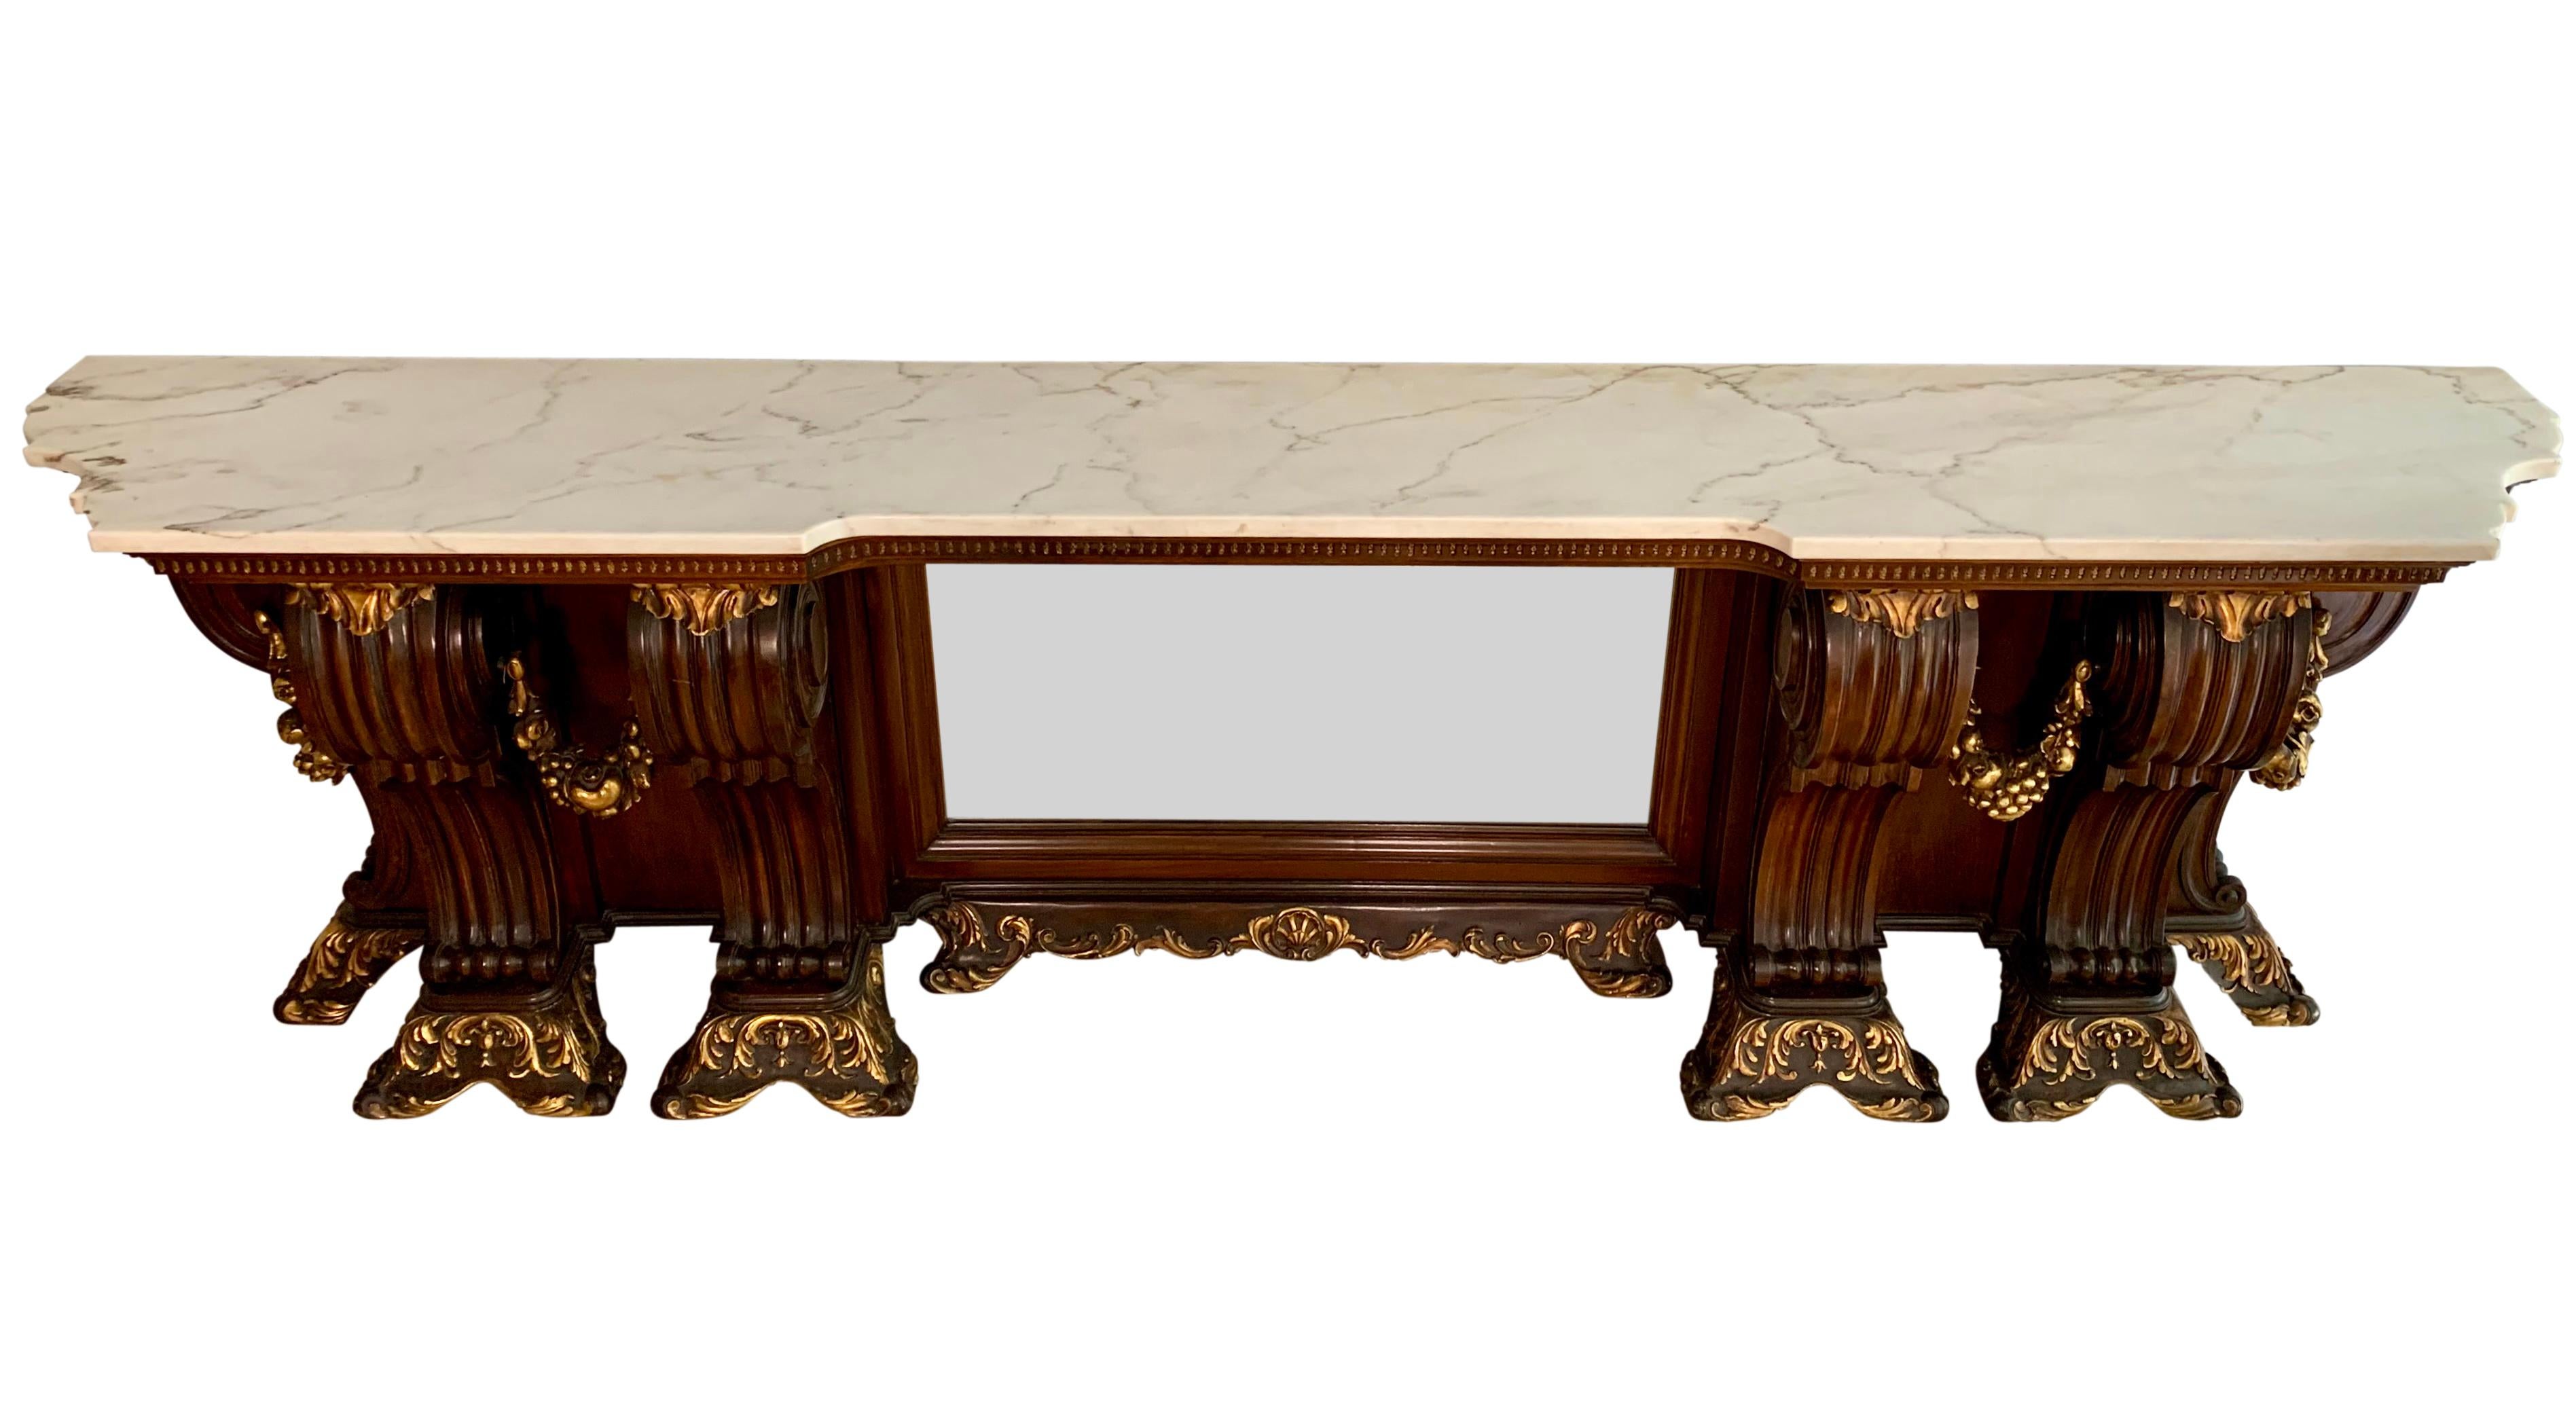 A Large Venetian Style Italian Carved Wood & Marble Top Console Table For Sale 2